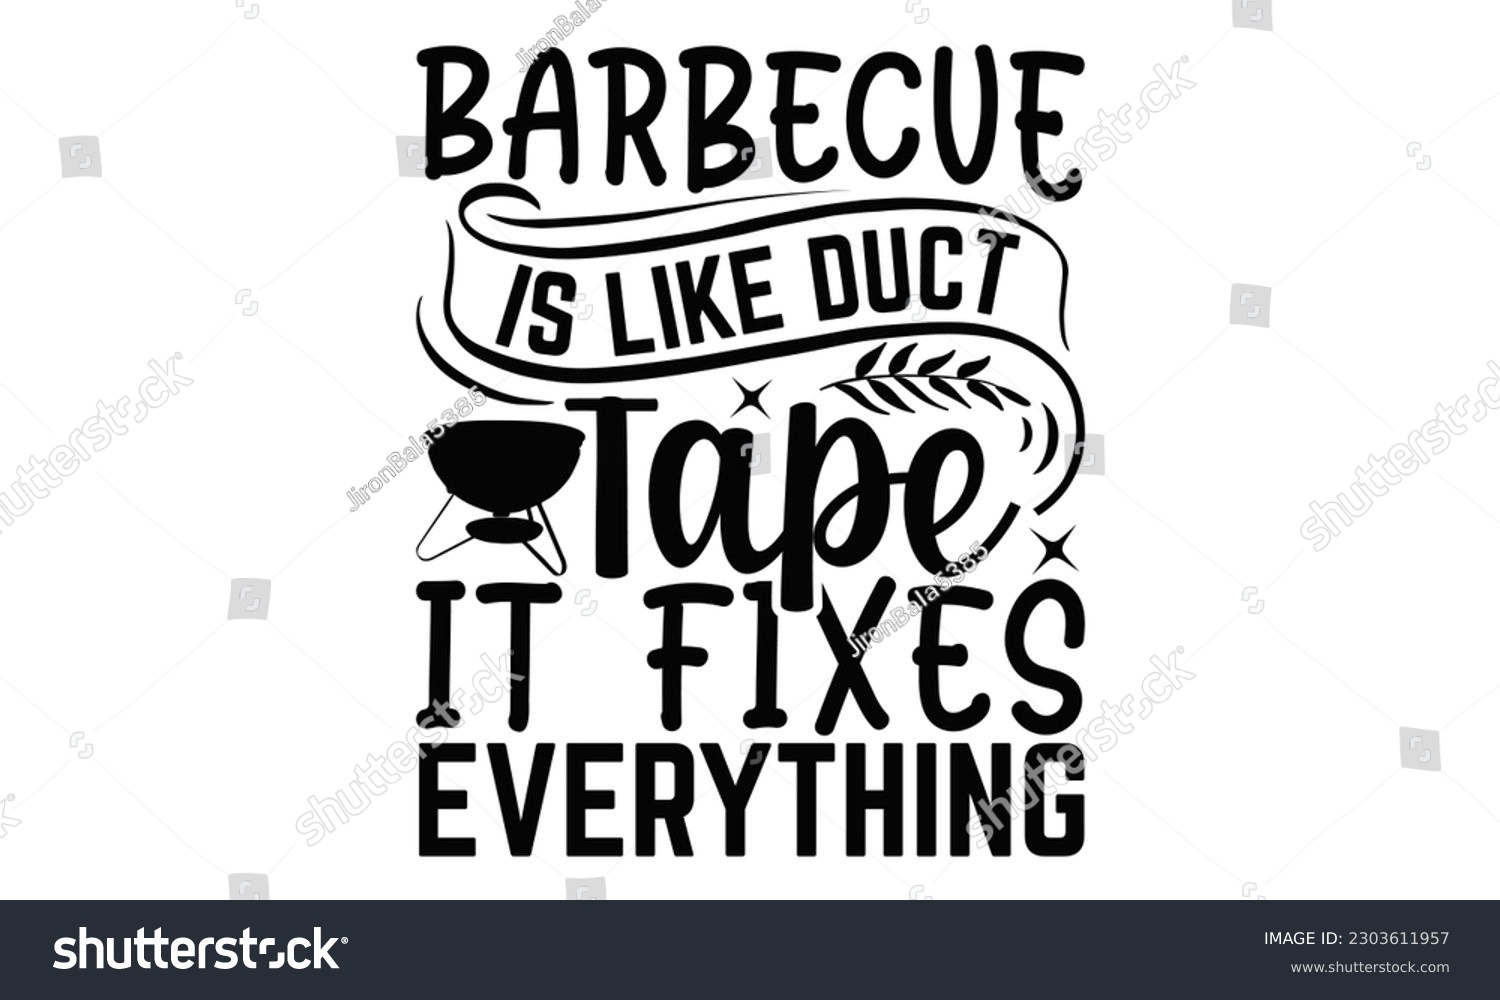 SVG of Barbecue Is Like Duct Tape It Fixes Everything - Barbecue SVG Design, Hand drawn vintage illustration with hand-lettering and decoration elements with, SVG Files for Cutting.
 svg